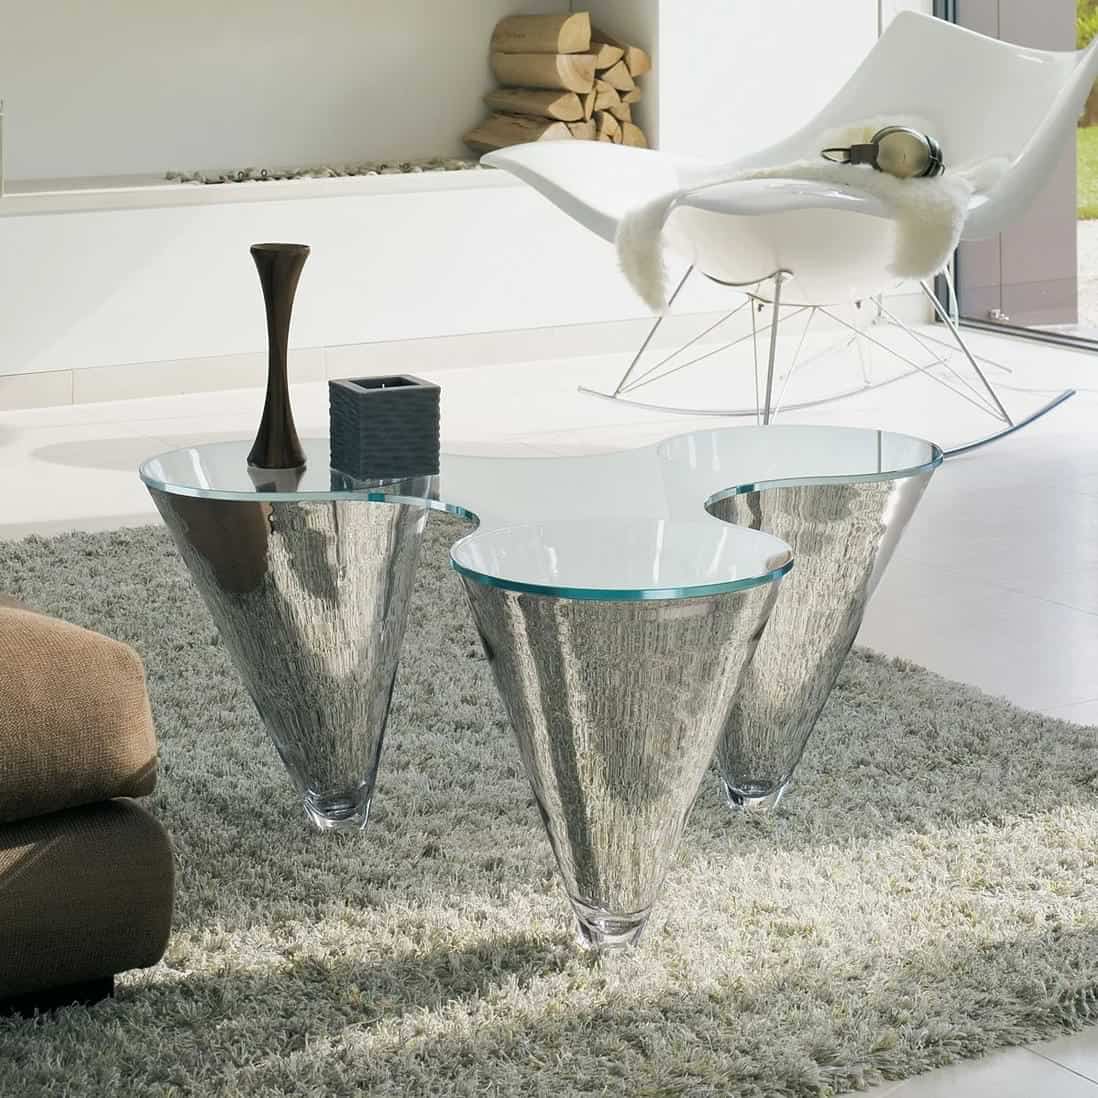 Abstract centre table